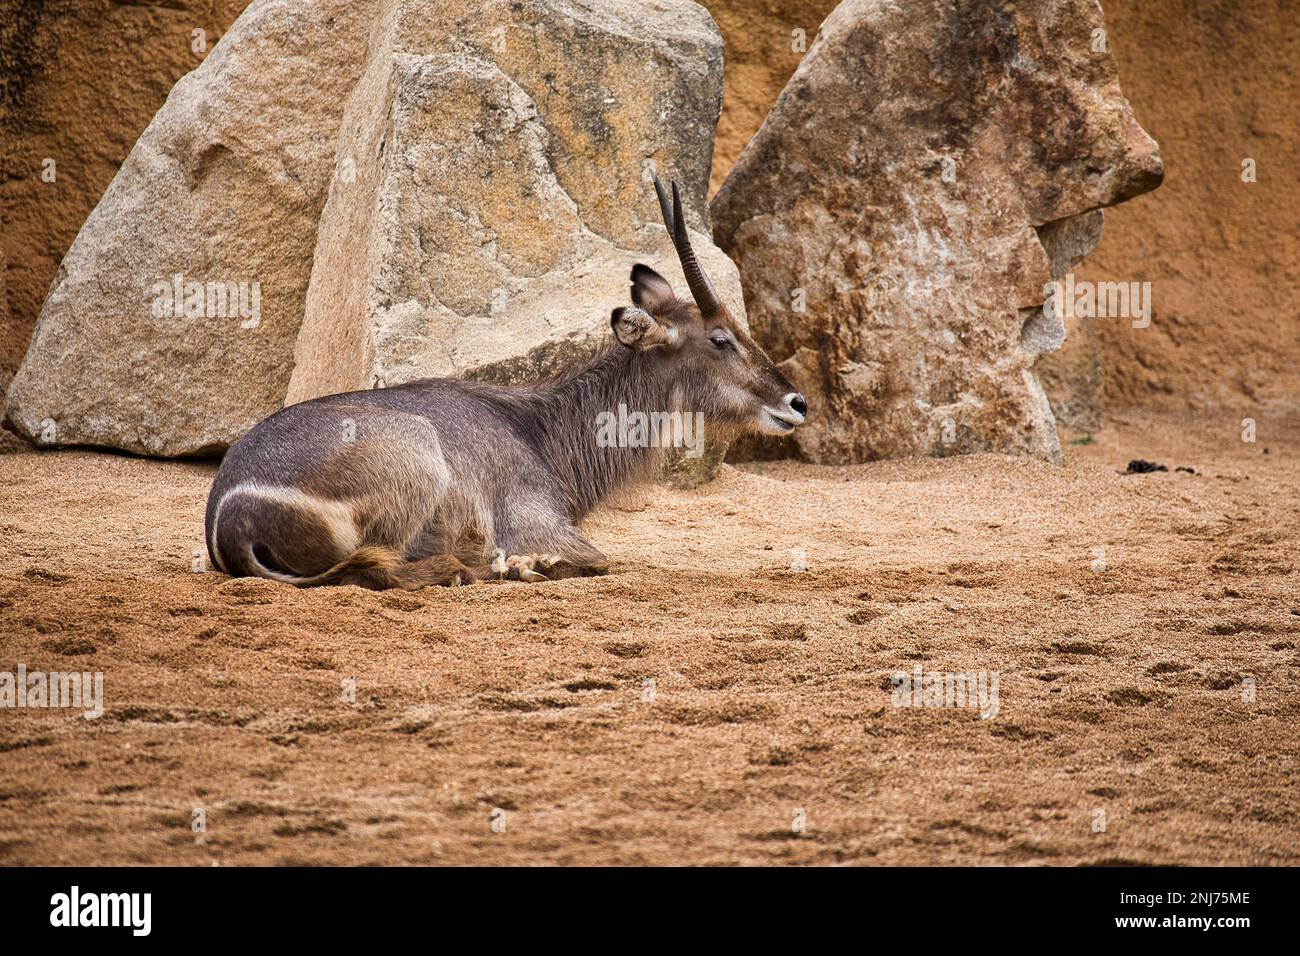 Full body of a lying antelope in a sandy environment, rocks in the background. Stock Photo